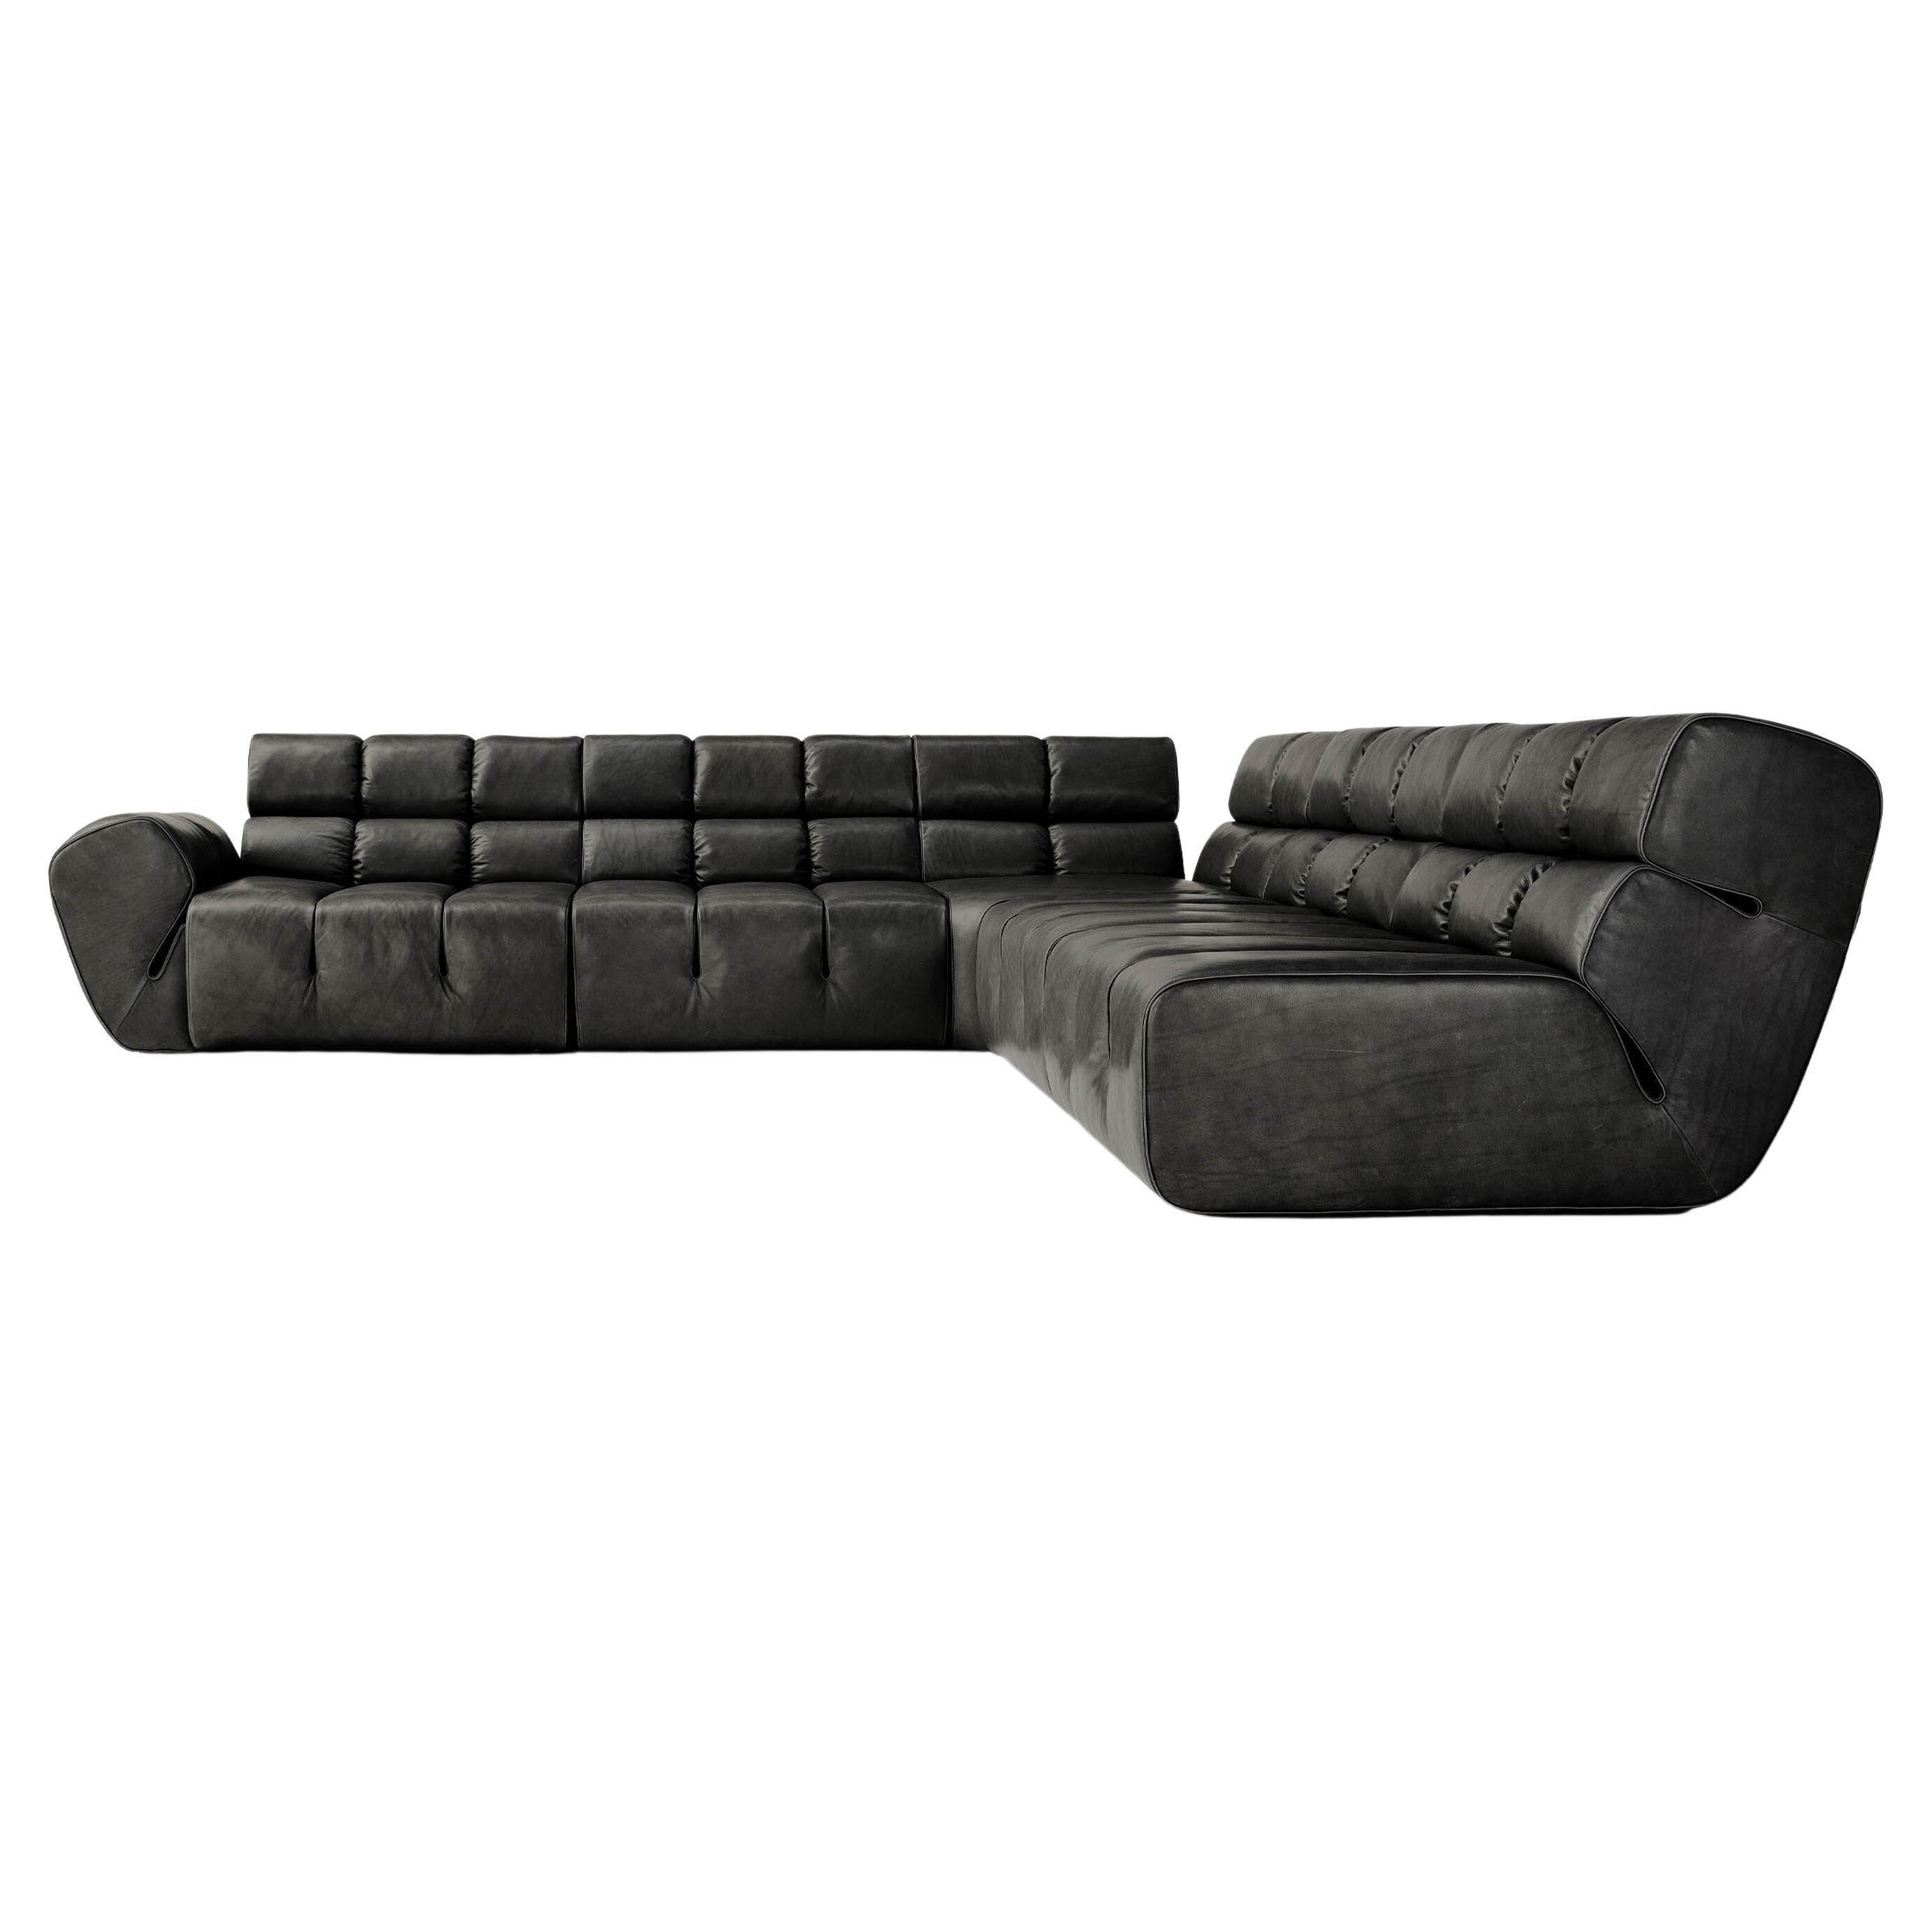 Contemporary Modular Sofa 'Palmo' by Amura Lab, Leather Stone Wash 263 For Sale